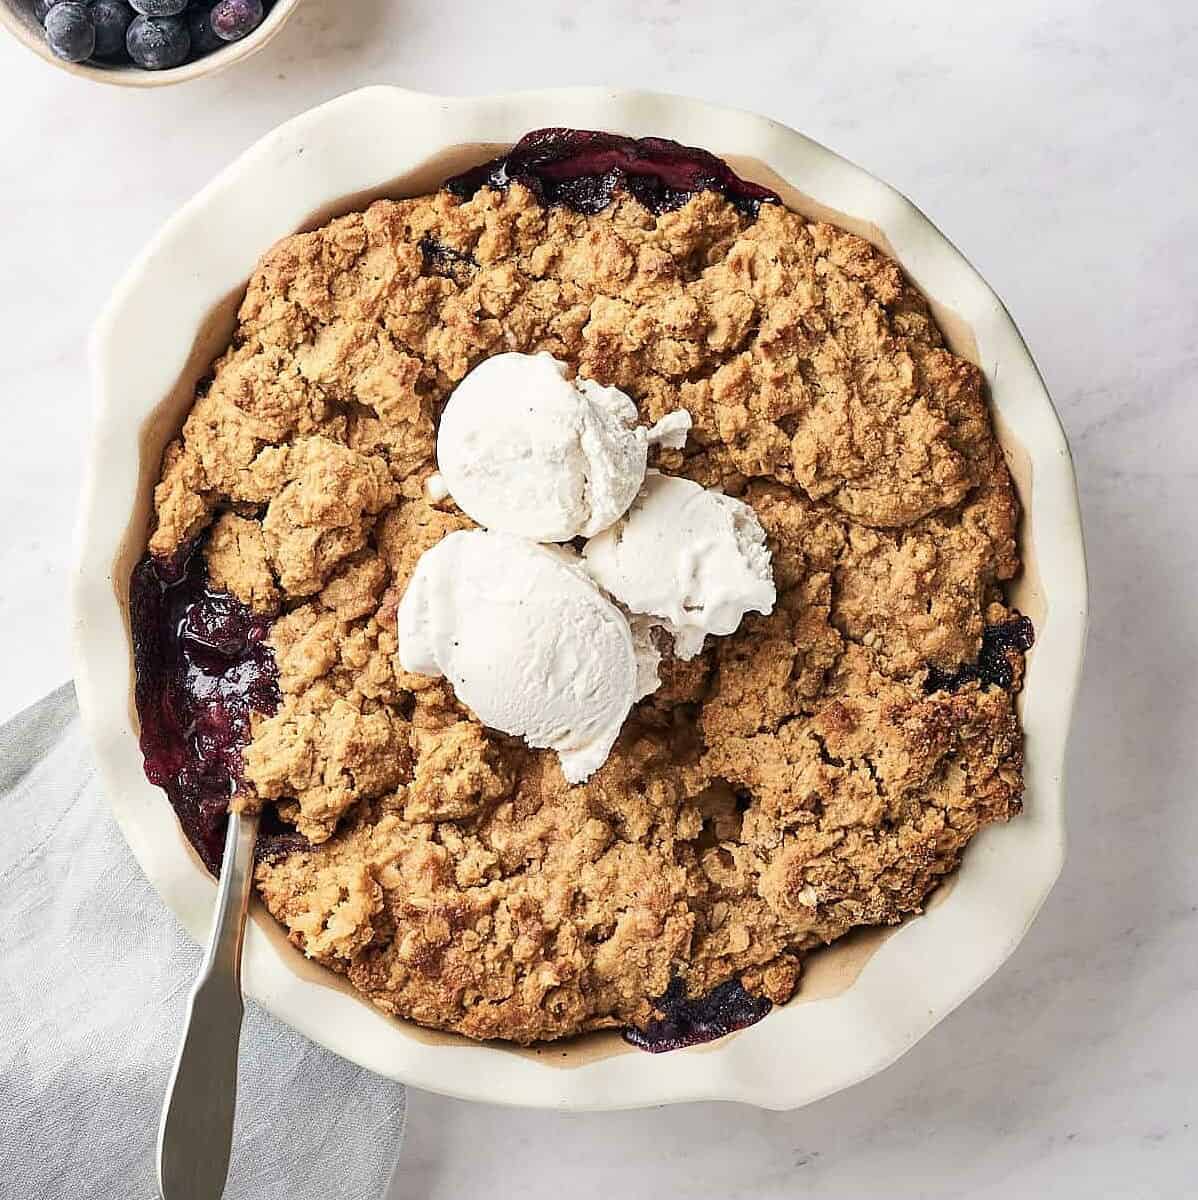 Sweet blueberries and juicy pears make the perfect pair in this vegan cobbler.